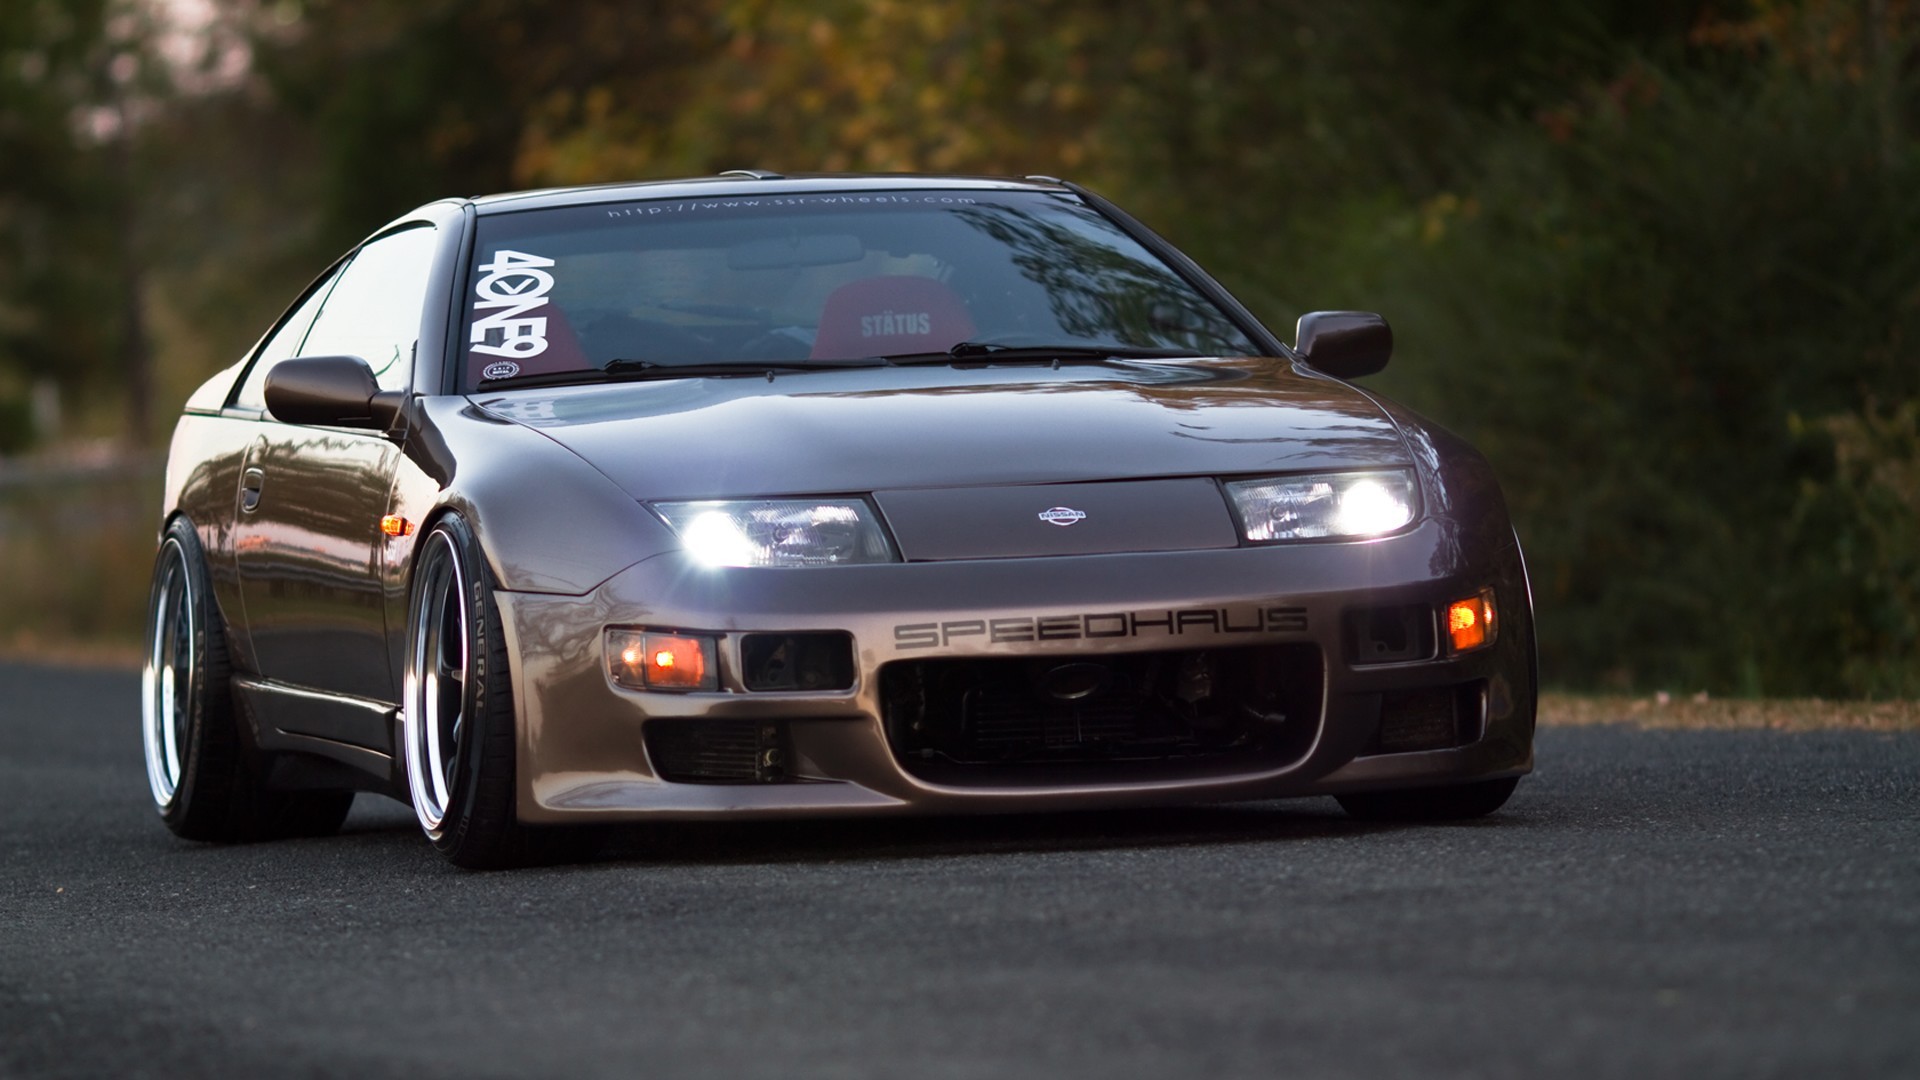 General 1920x1080 car Nissan 300ZX Japanese cars Nissan Fairlady Z Nissan frontal view vehicle